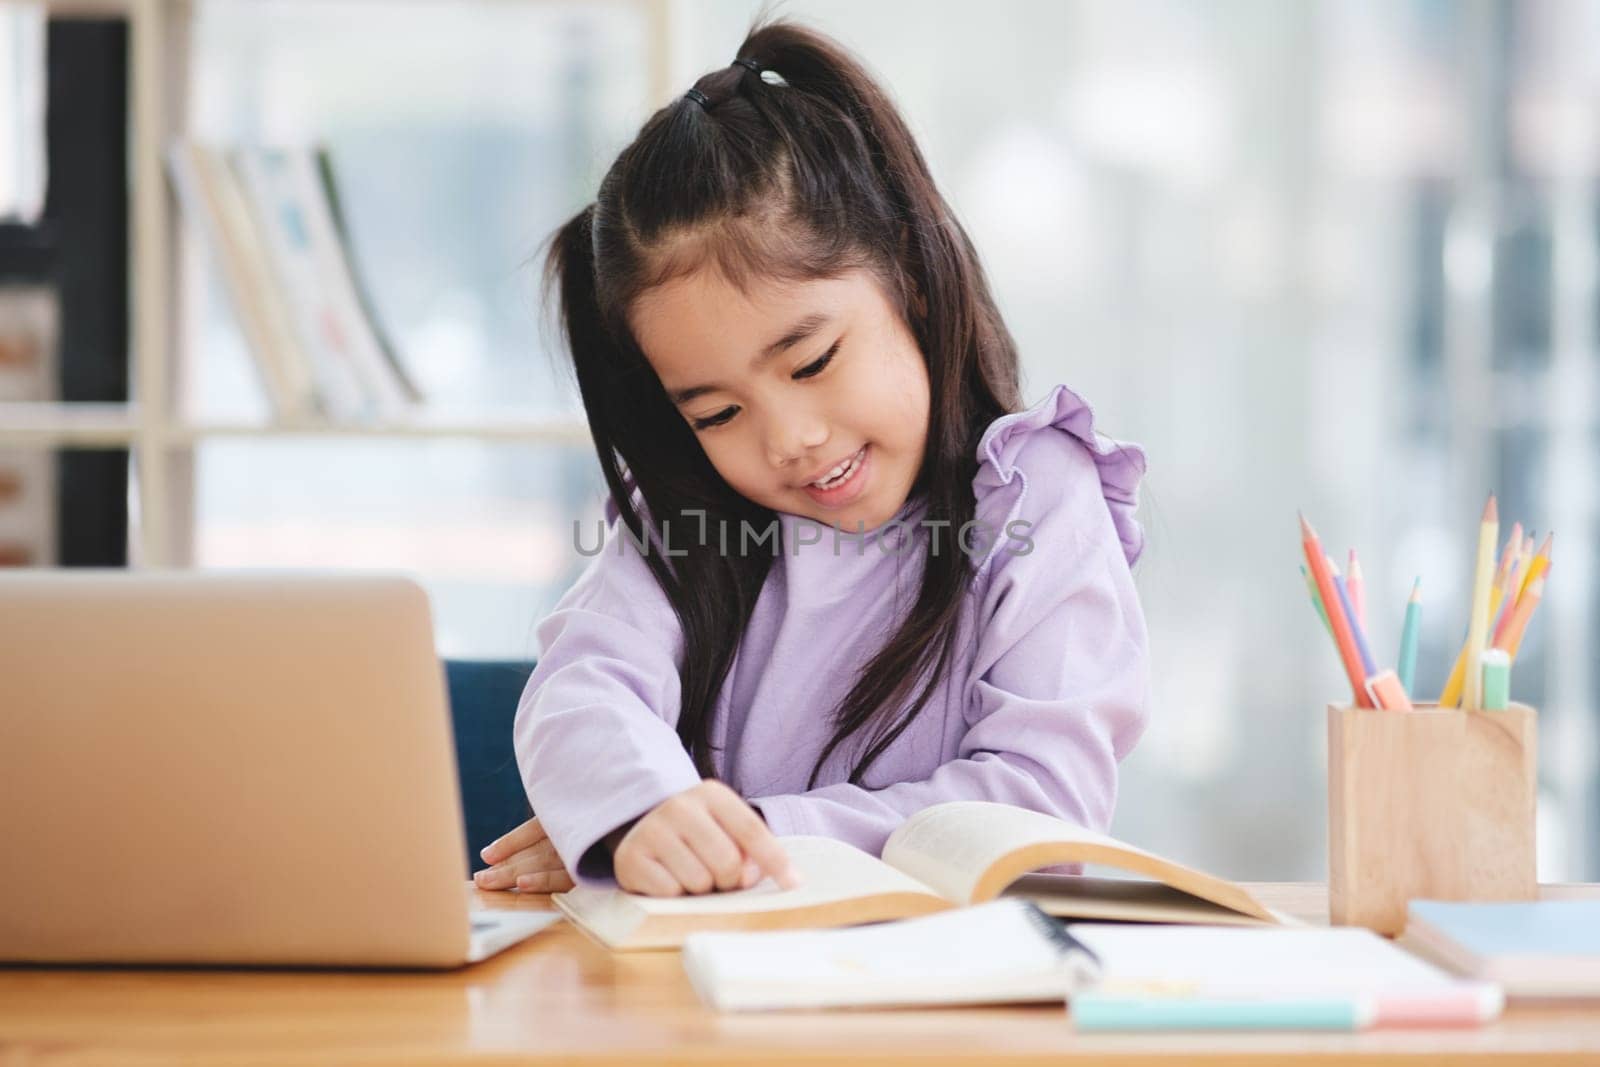 A young girl is sitting at a desk with a laptop and a book by ijeab